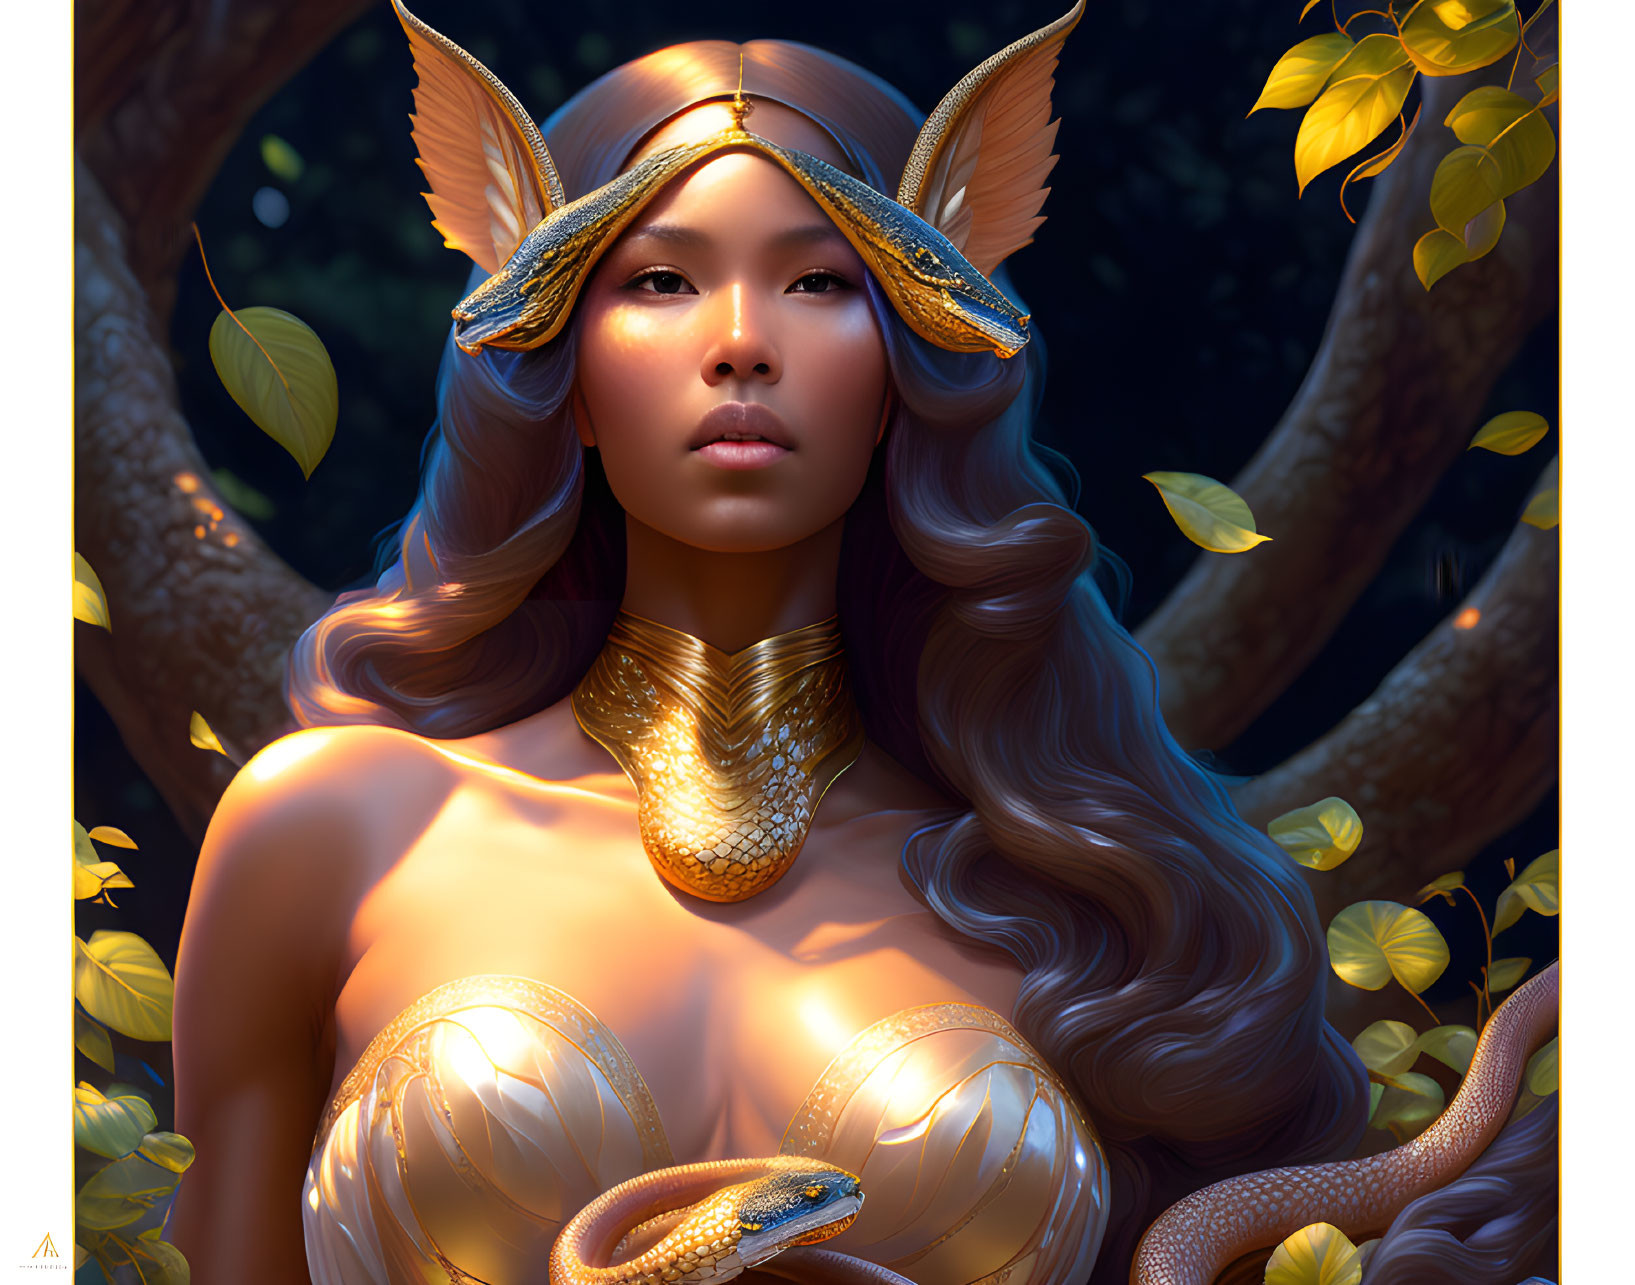 Fantasy portrait of woman with elf-like ears in gold armor and snake motifs surrounded by golden leaves